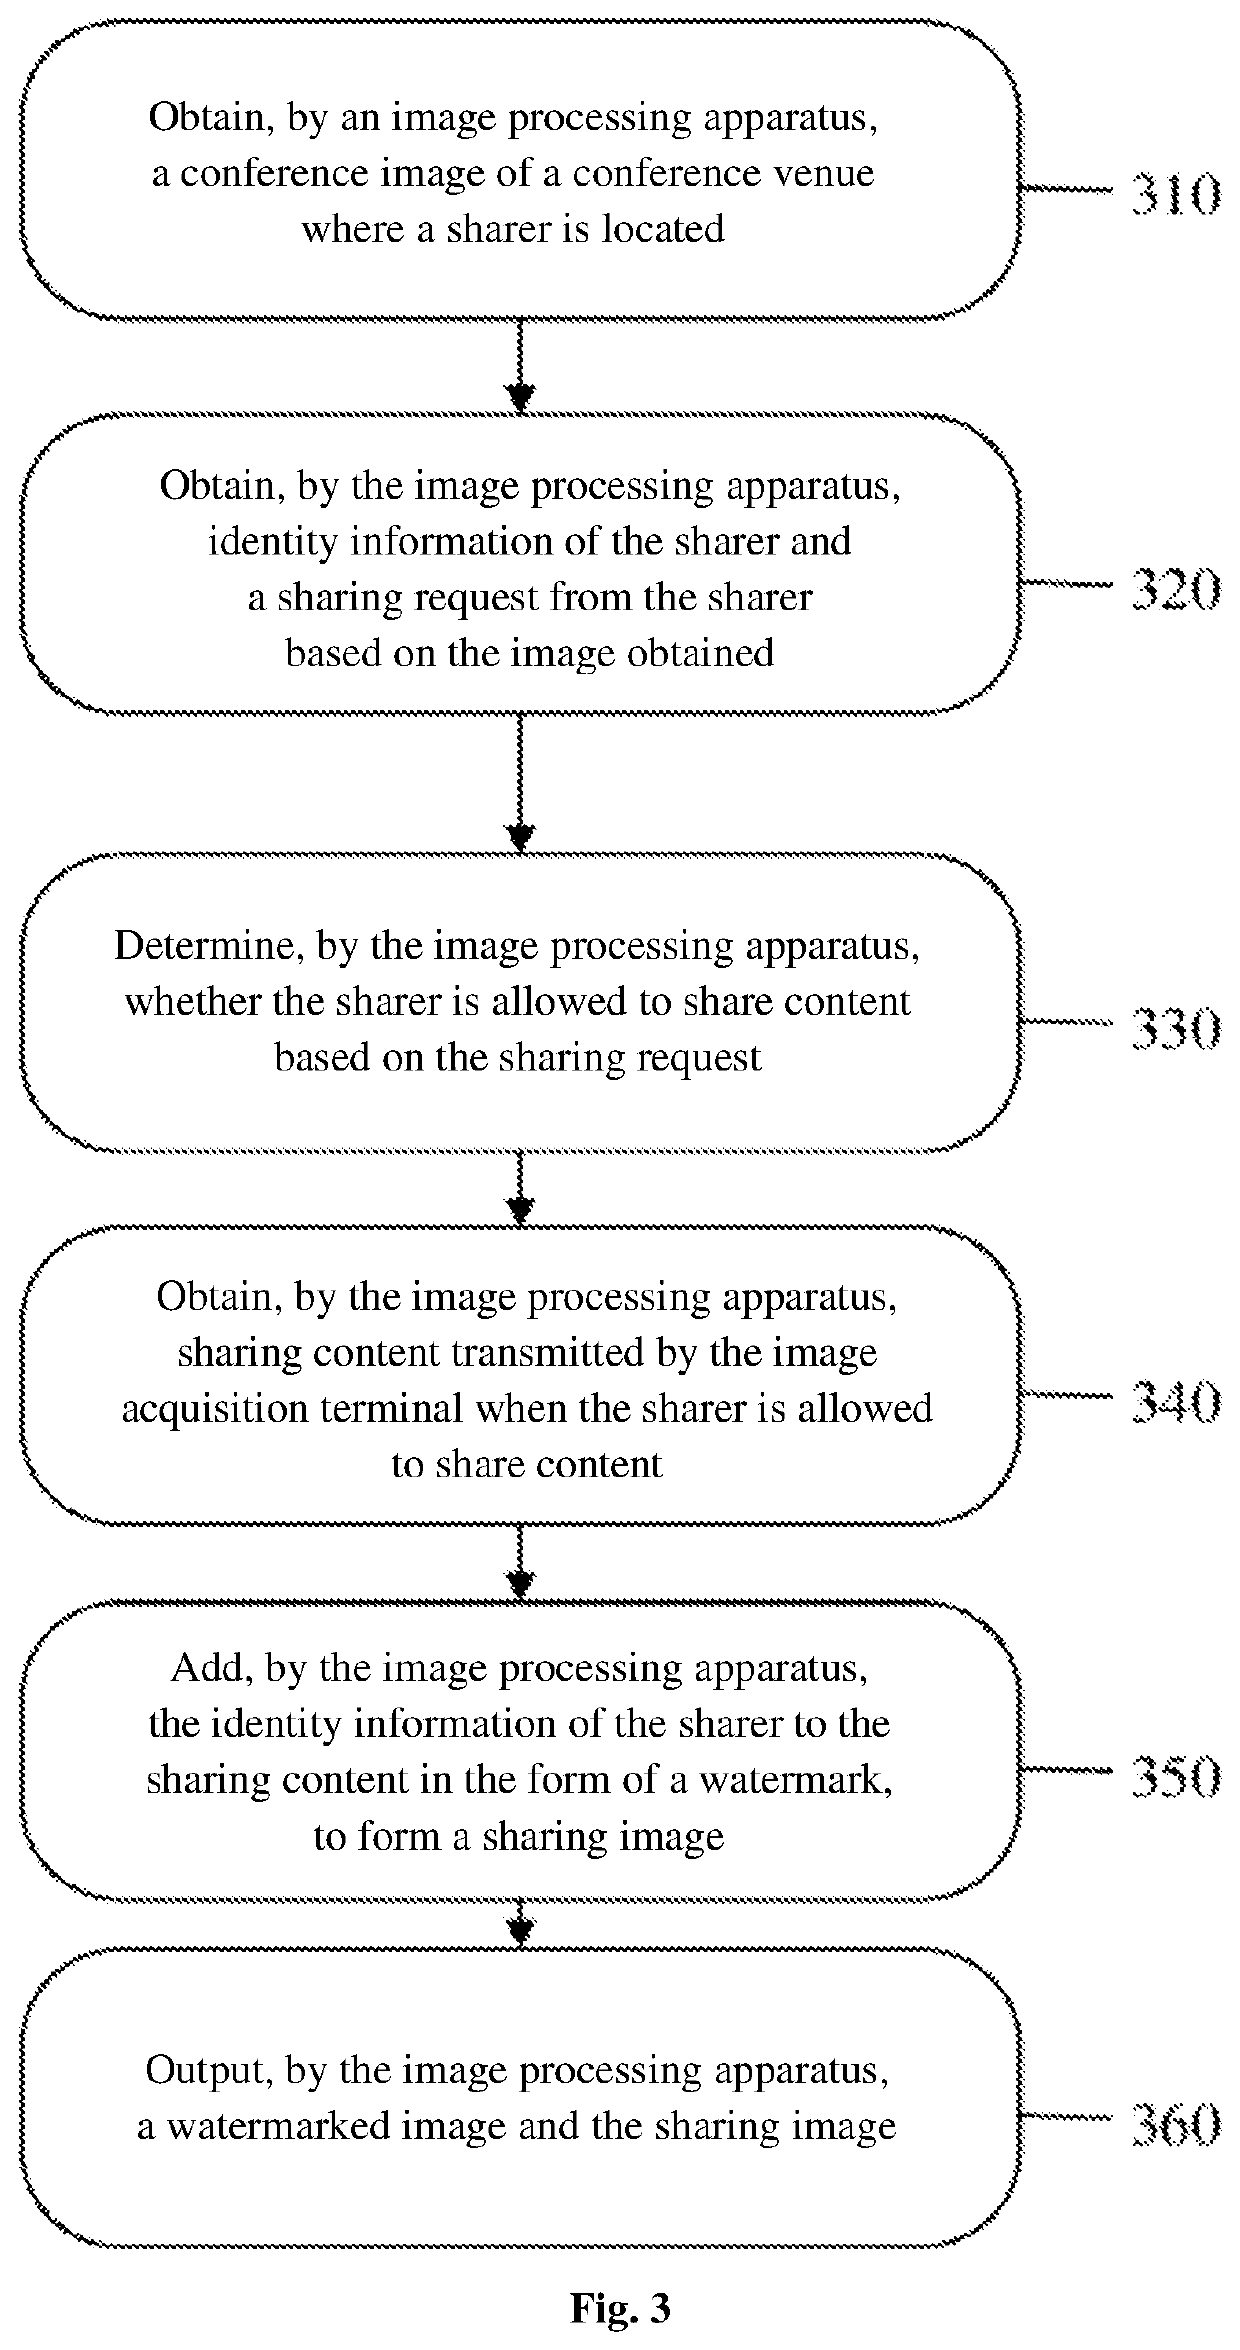 Image processing method and apparatus based on video conference